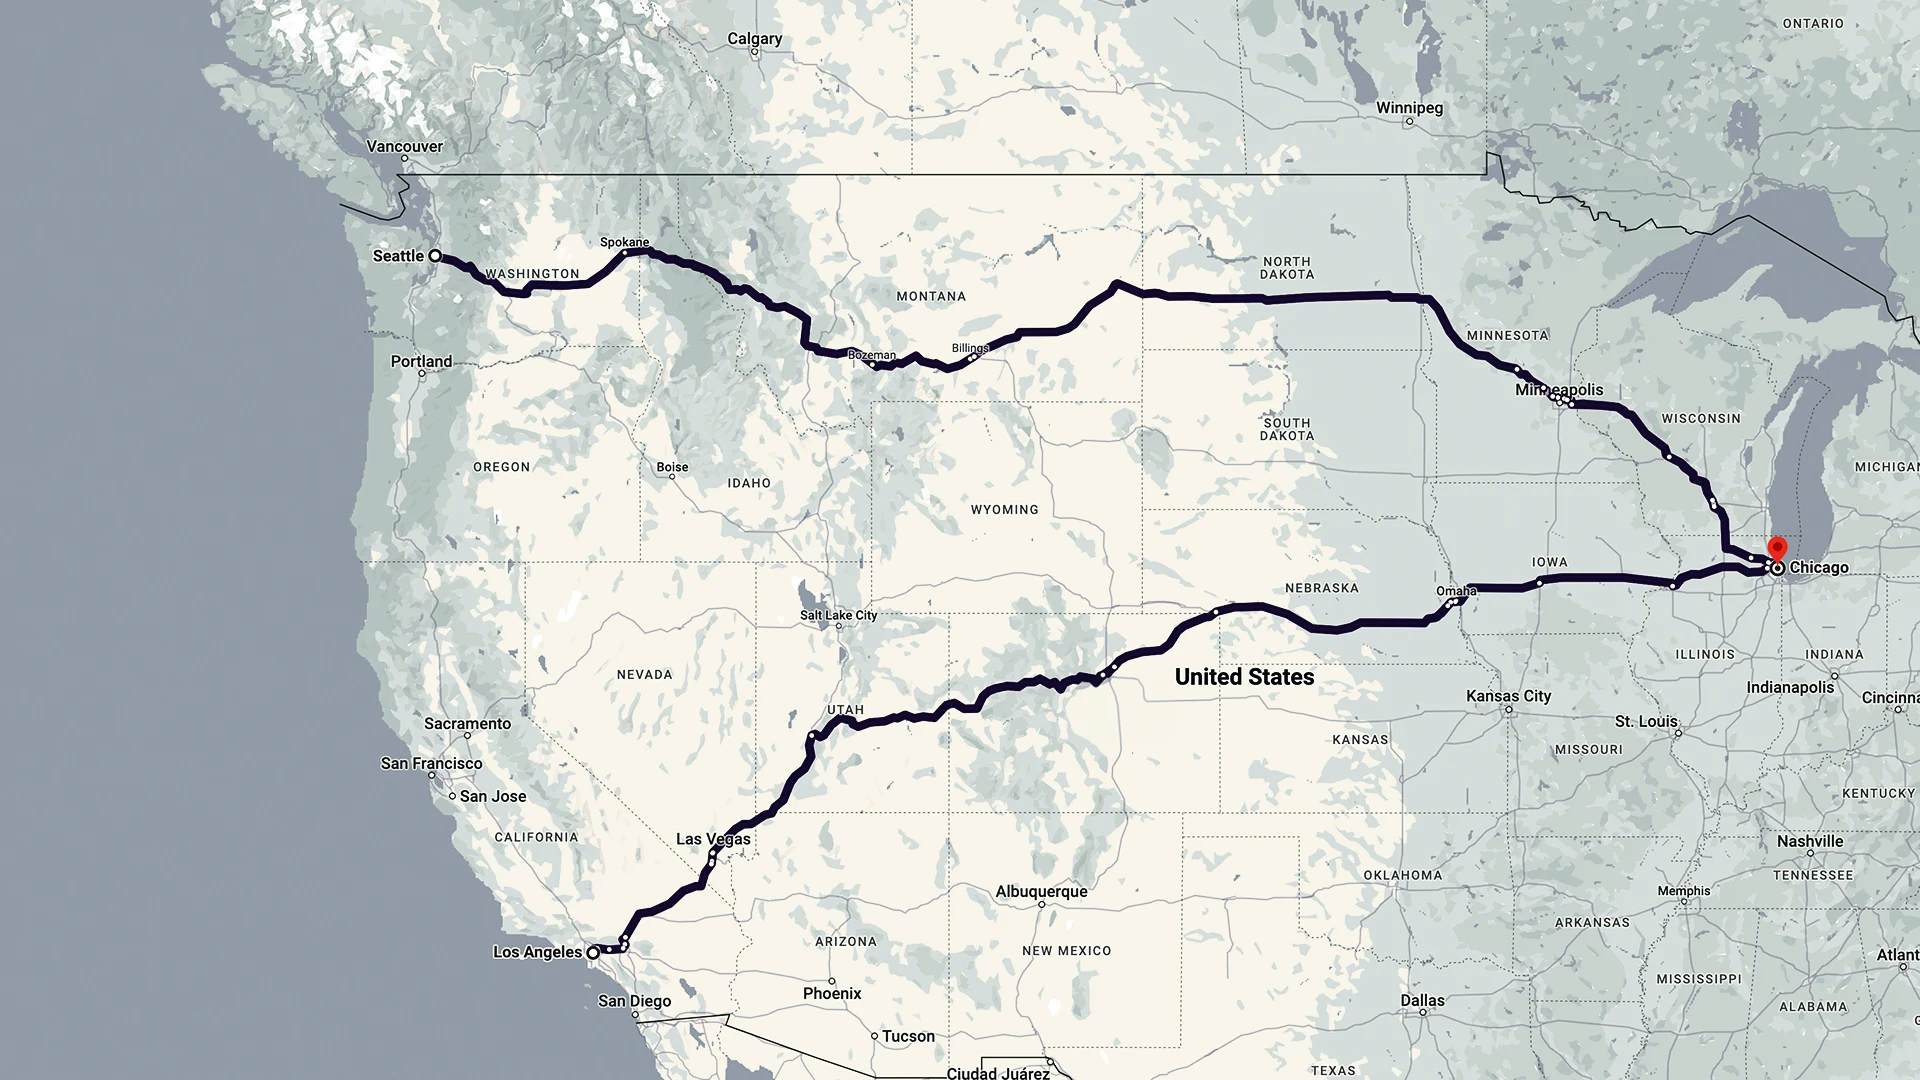 A map of the United States highlighting a significant transportation or shipping route from West to Midwest.